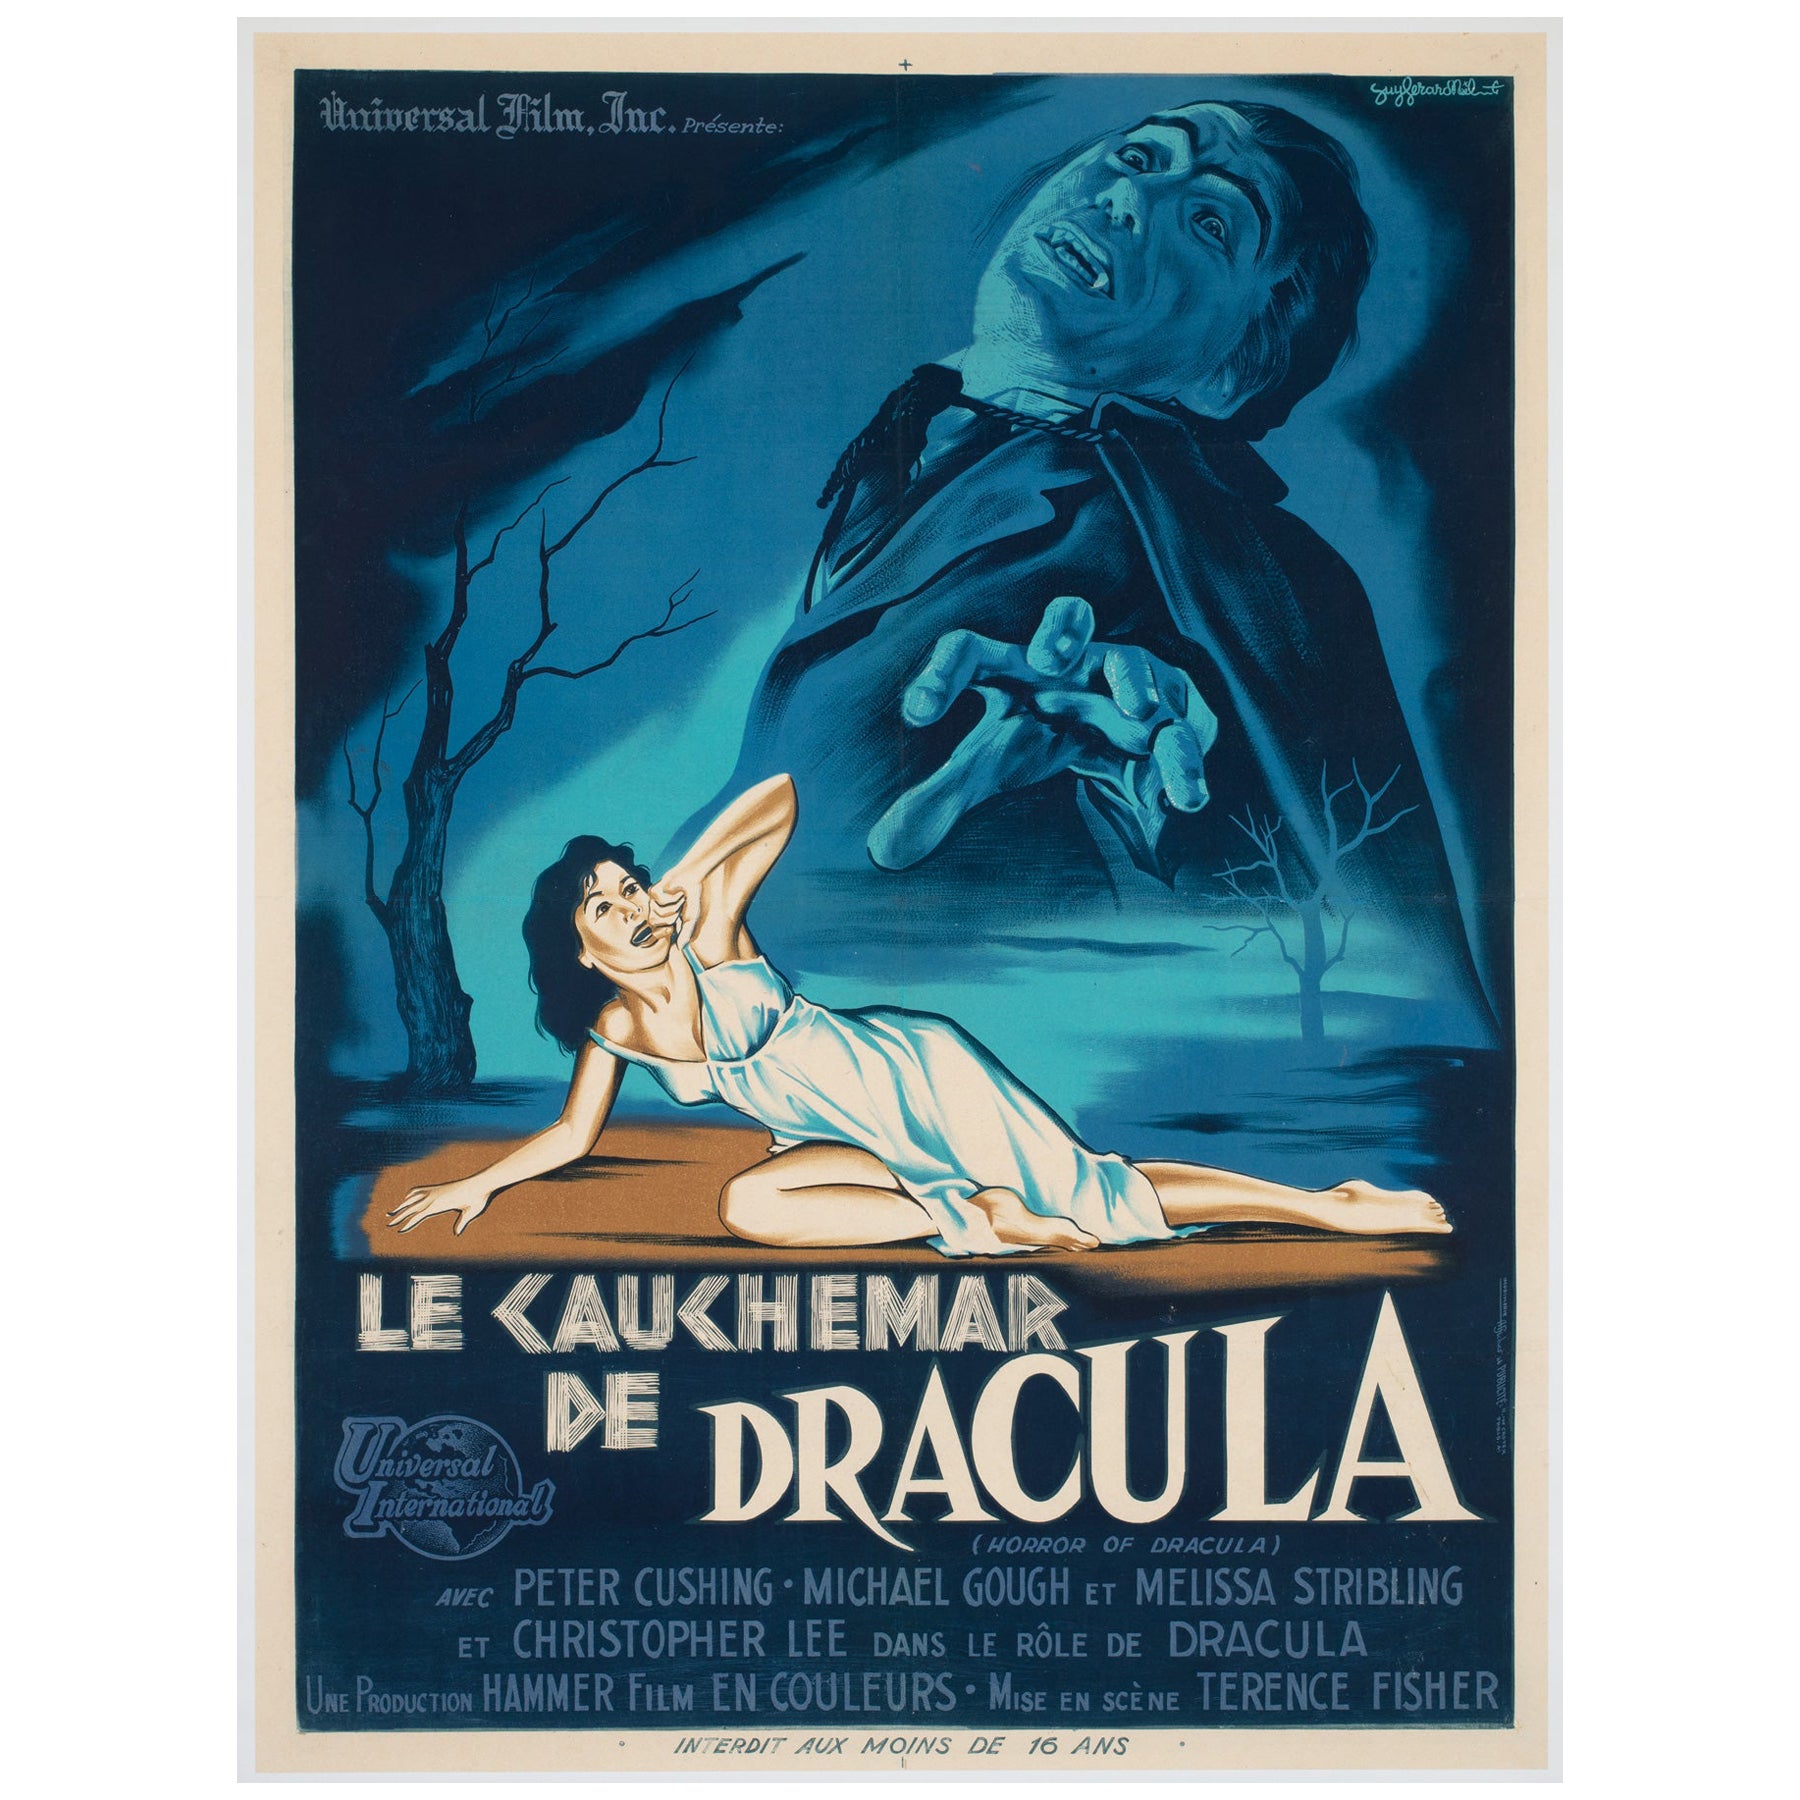 Horror of Dracula 1959 French Moyenne Film Poster, Guy Gerard Noel For Sale